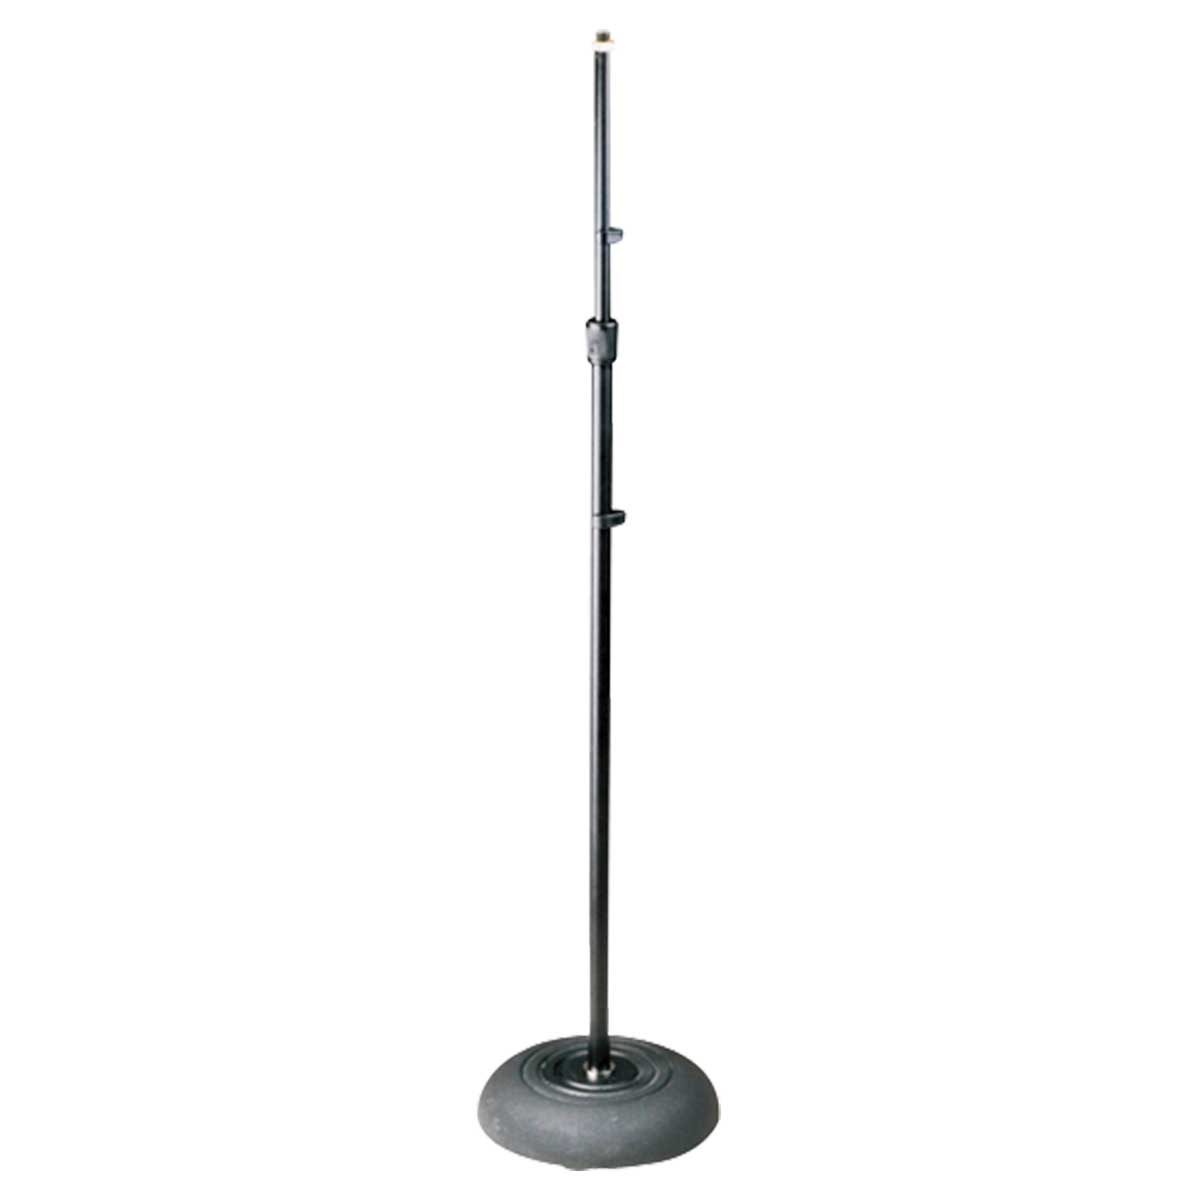 Australian Monitor ATC404 Microphone Telescopic Floor Stand with Round Base